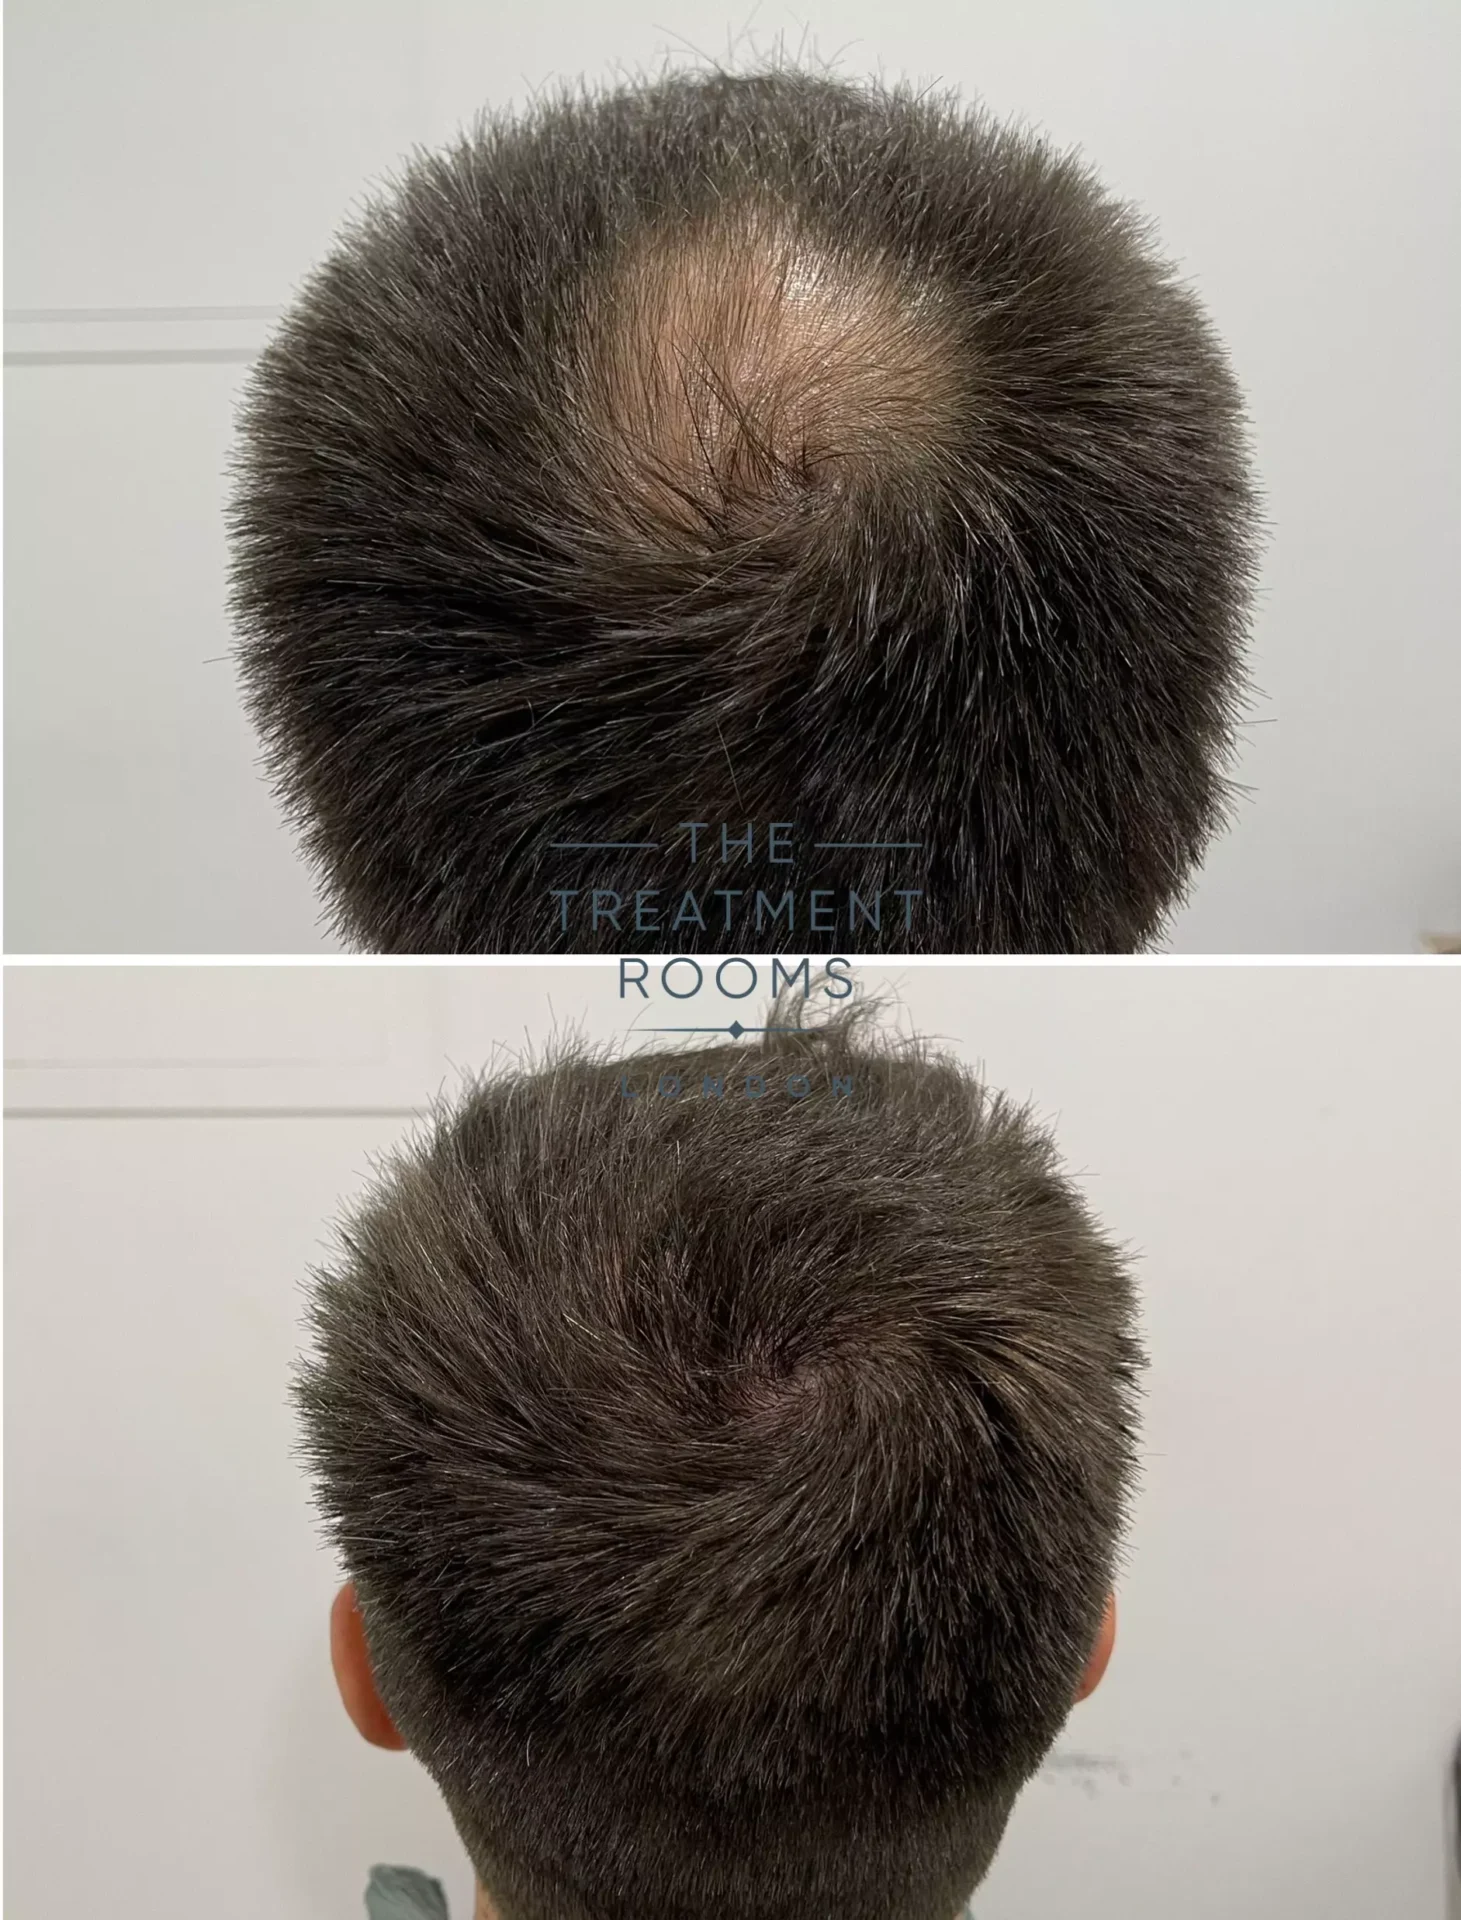 best crown hair transplant clinic UK 1930 grafts before and after